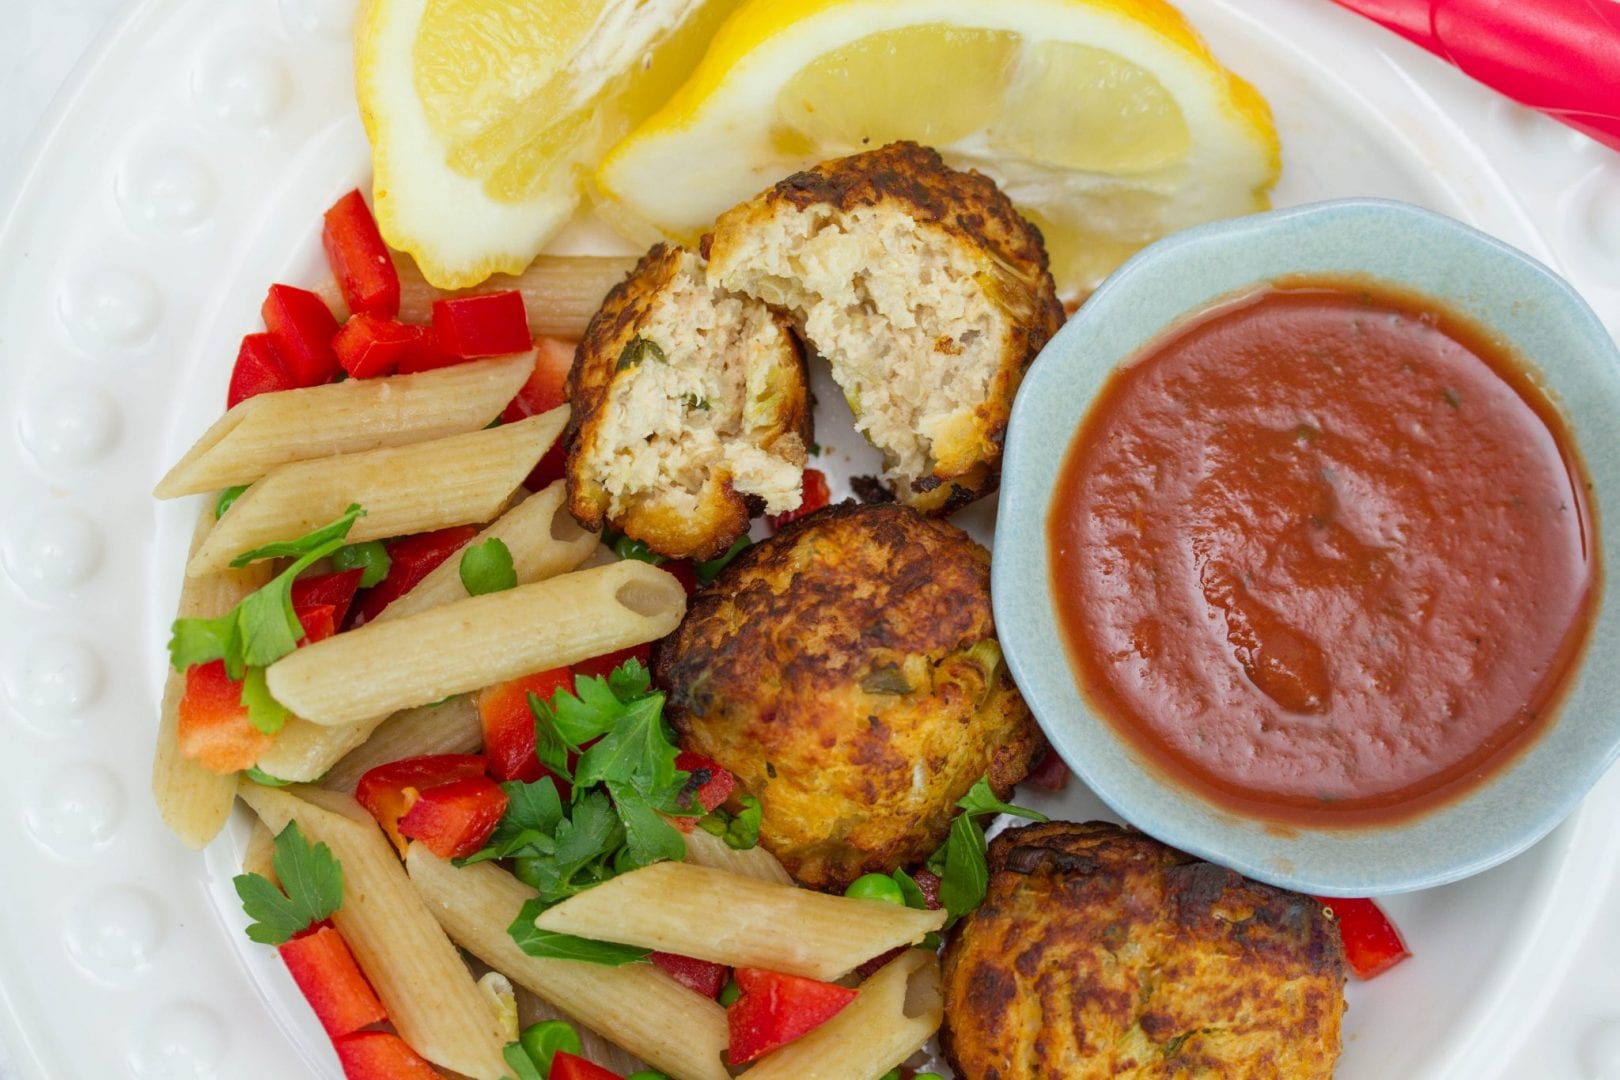 Chicken balls - try these delicious pear and quinoa chicken balls for a healthy and tasty kids meal